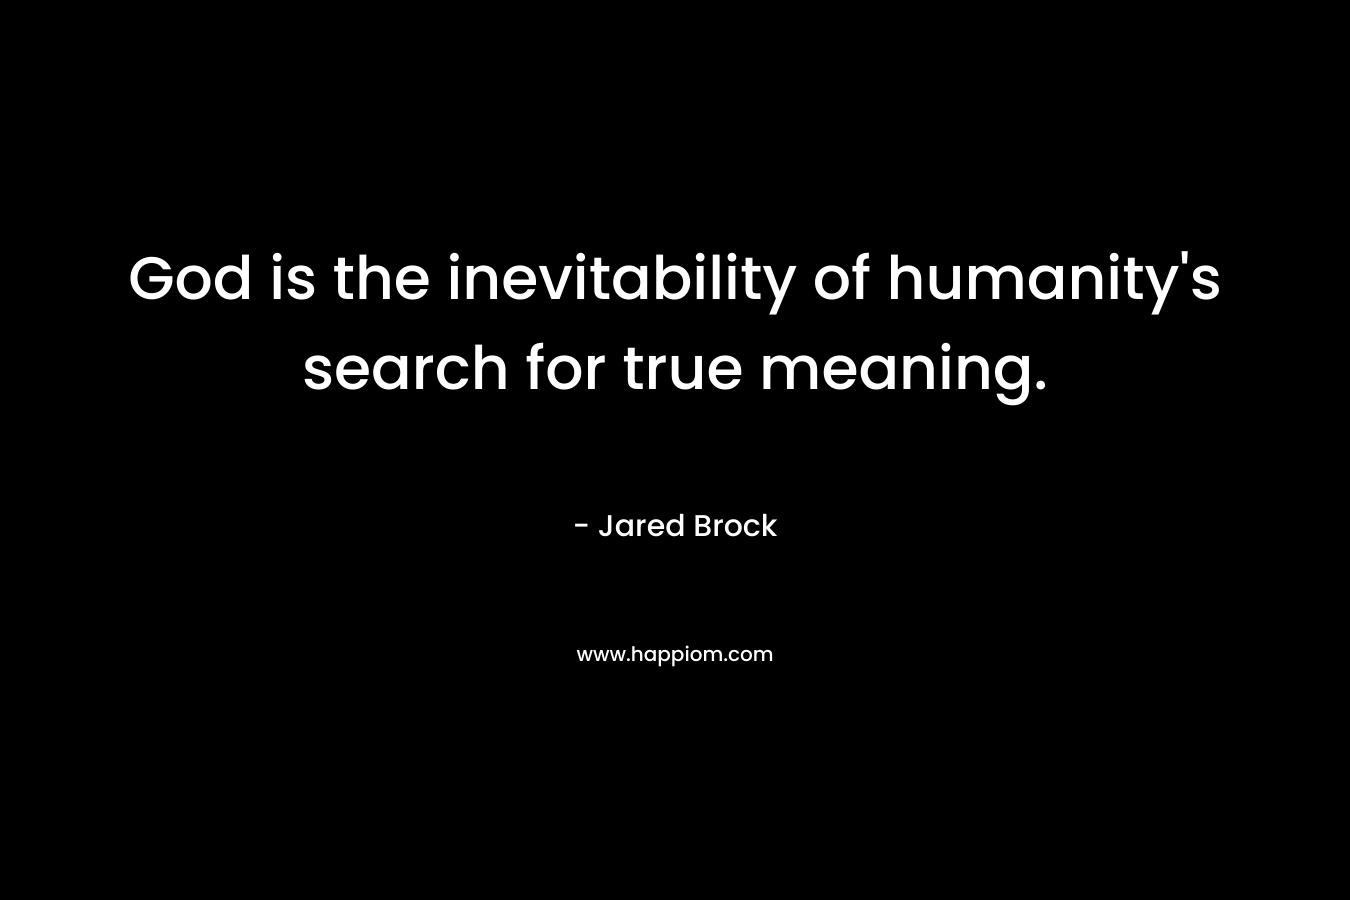 God is the inevitability of humanity's search for true meaning.